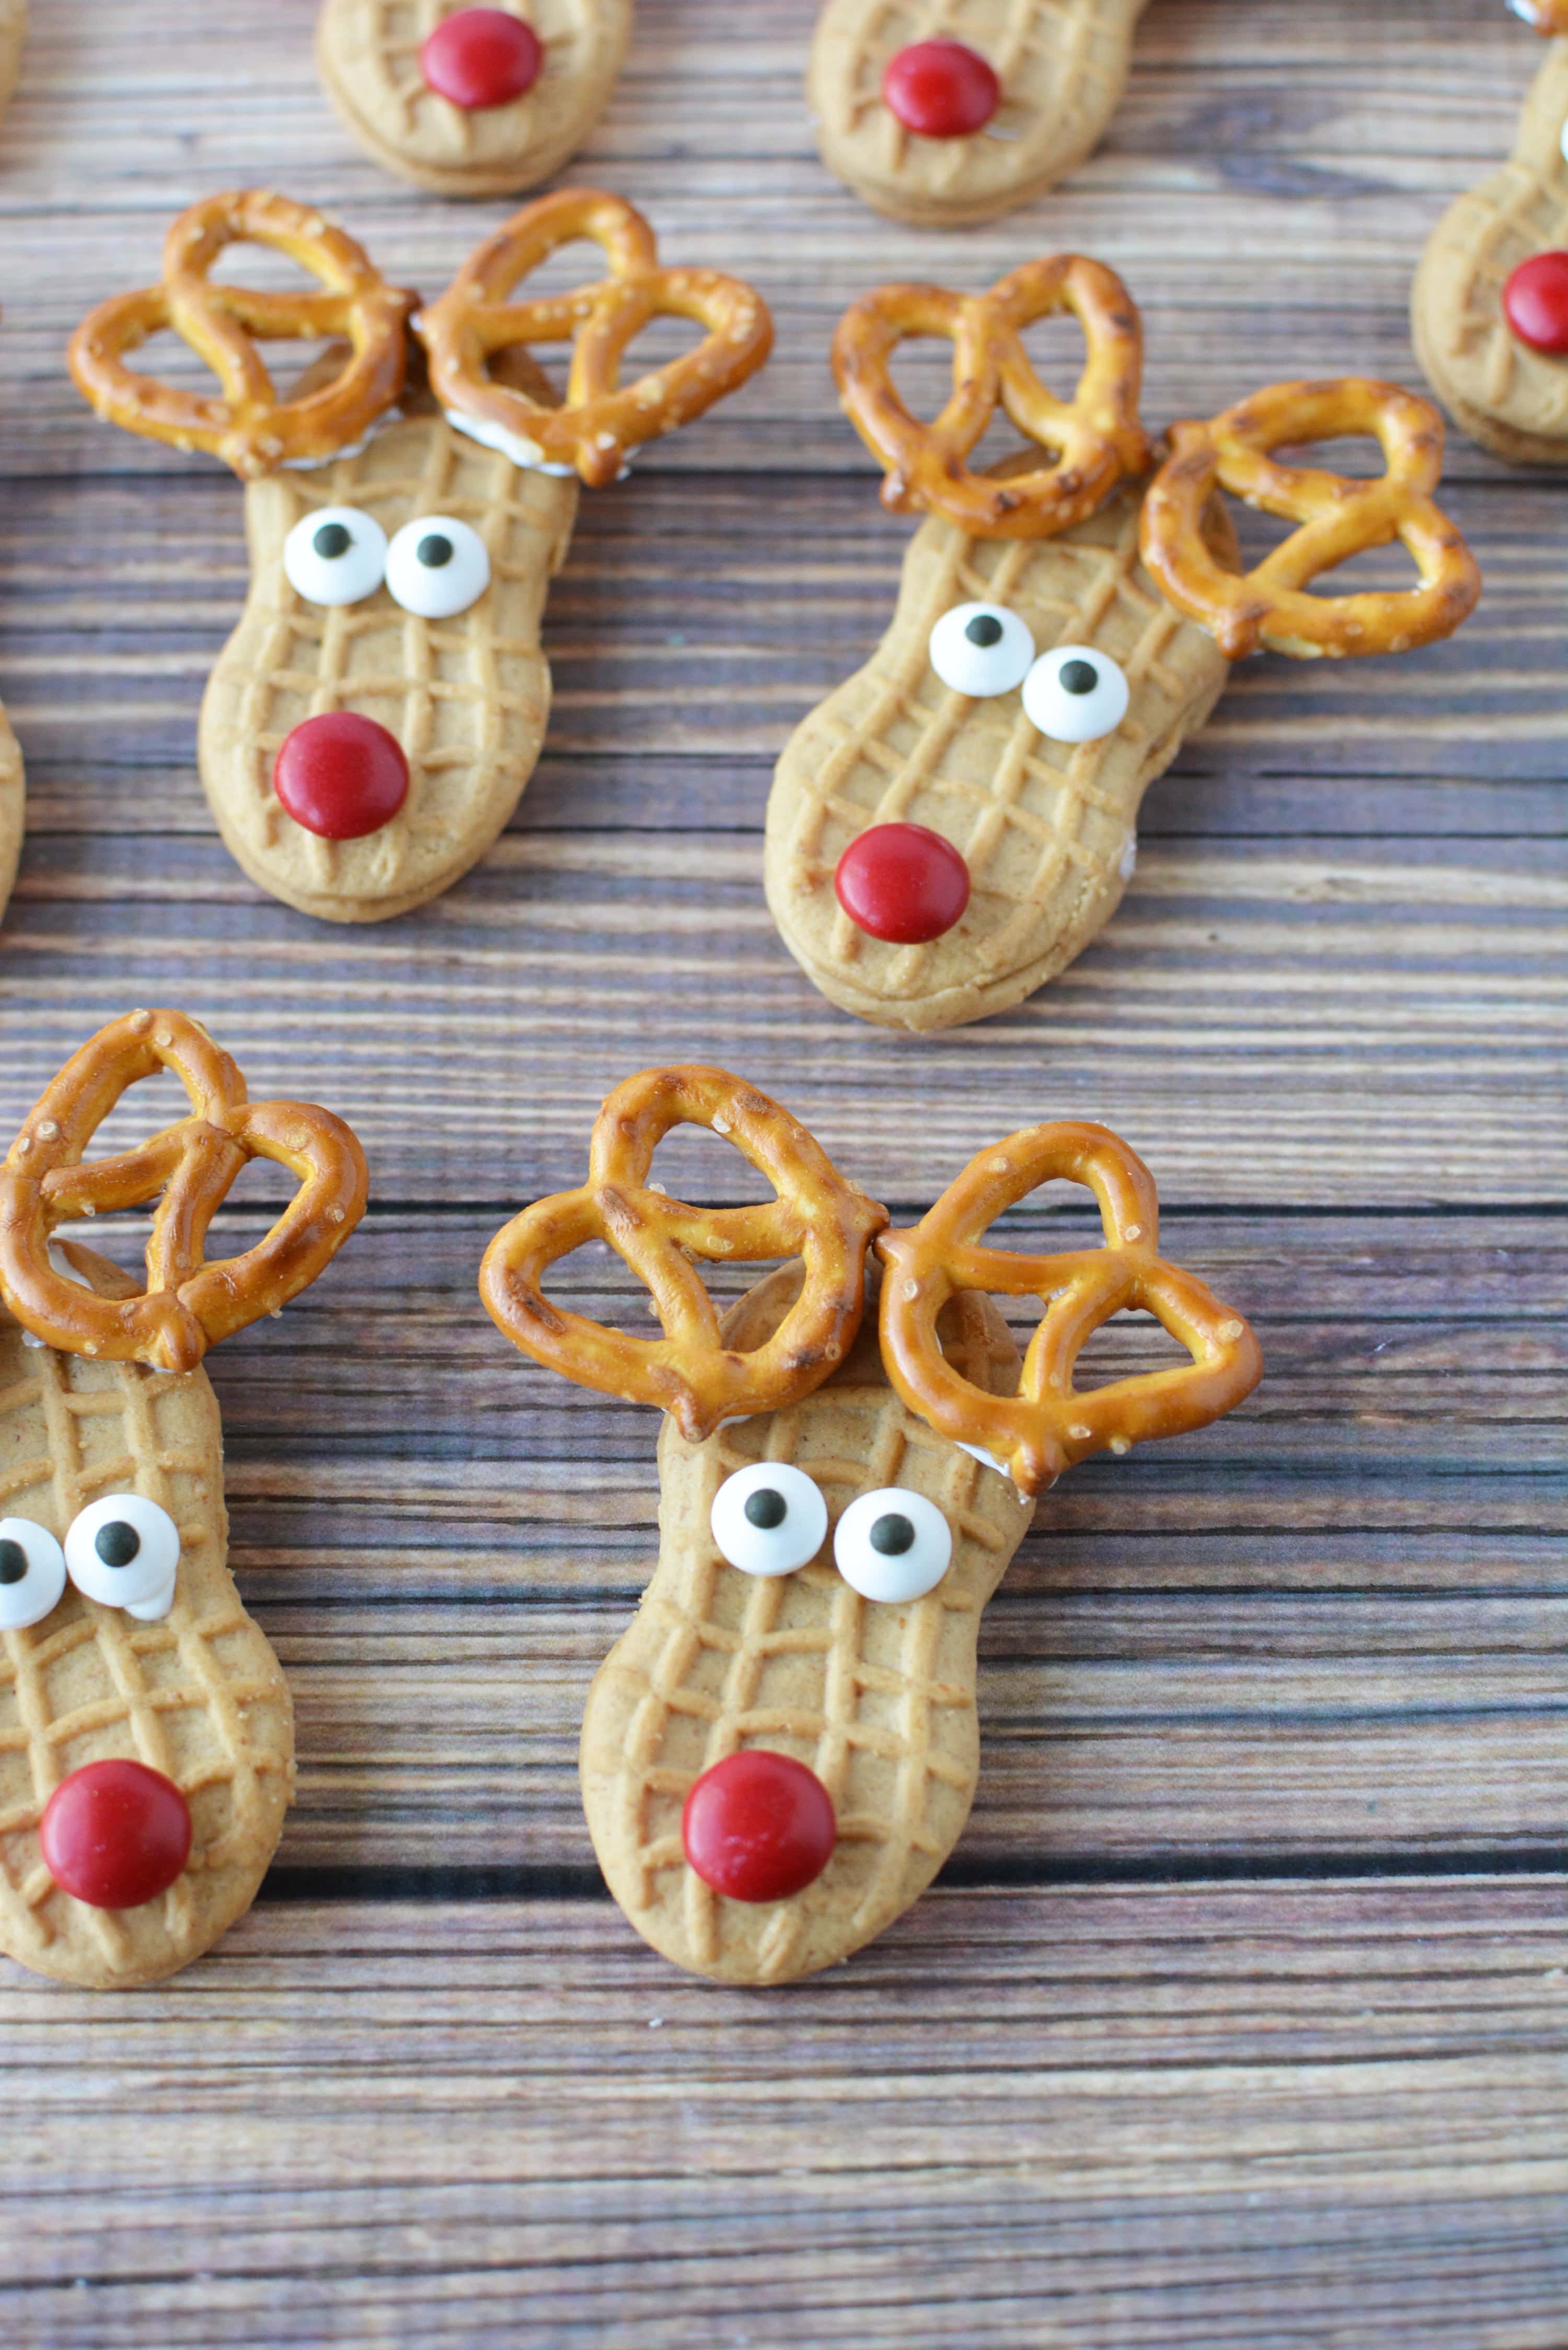 no-bake-nutter-butter-reindeer-cookies-so-cute-thrifty-nw-mom